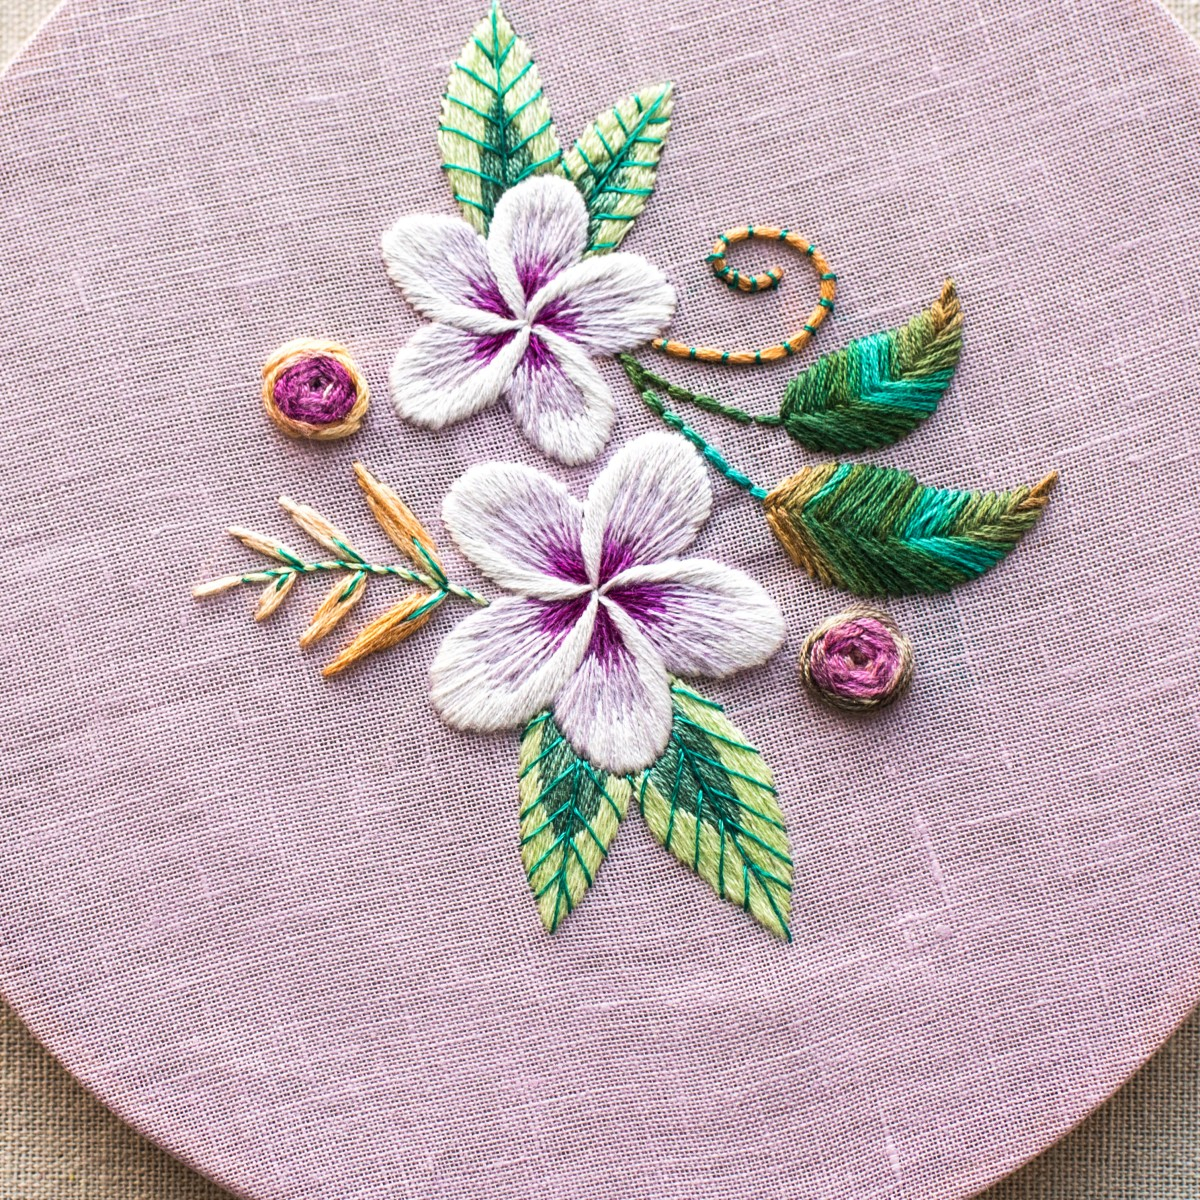 Rose Patterns For Embroidery 7 Beautiful Ways To Hand Embroider Flowers